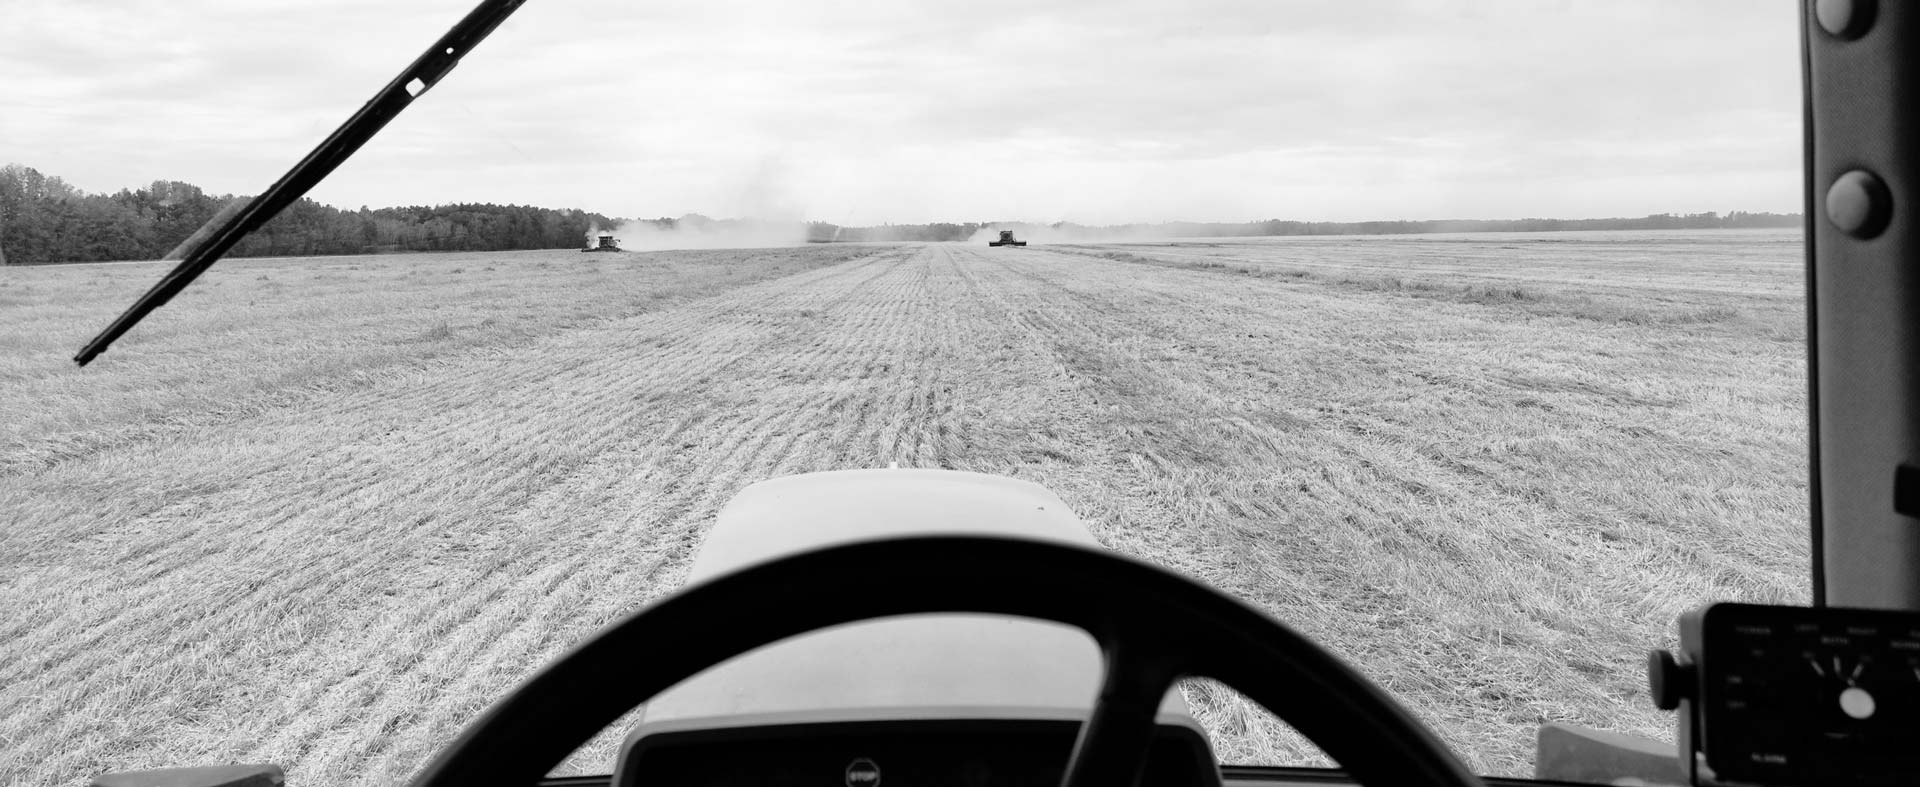 View front the driver's seat of a combine out into a field; Grayscale photo